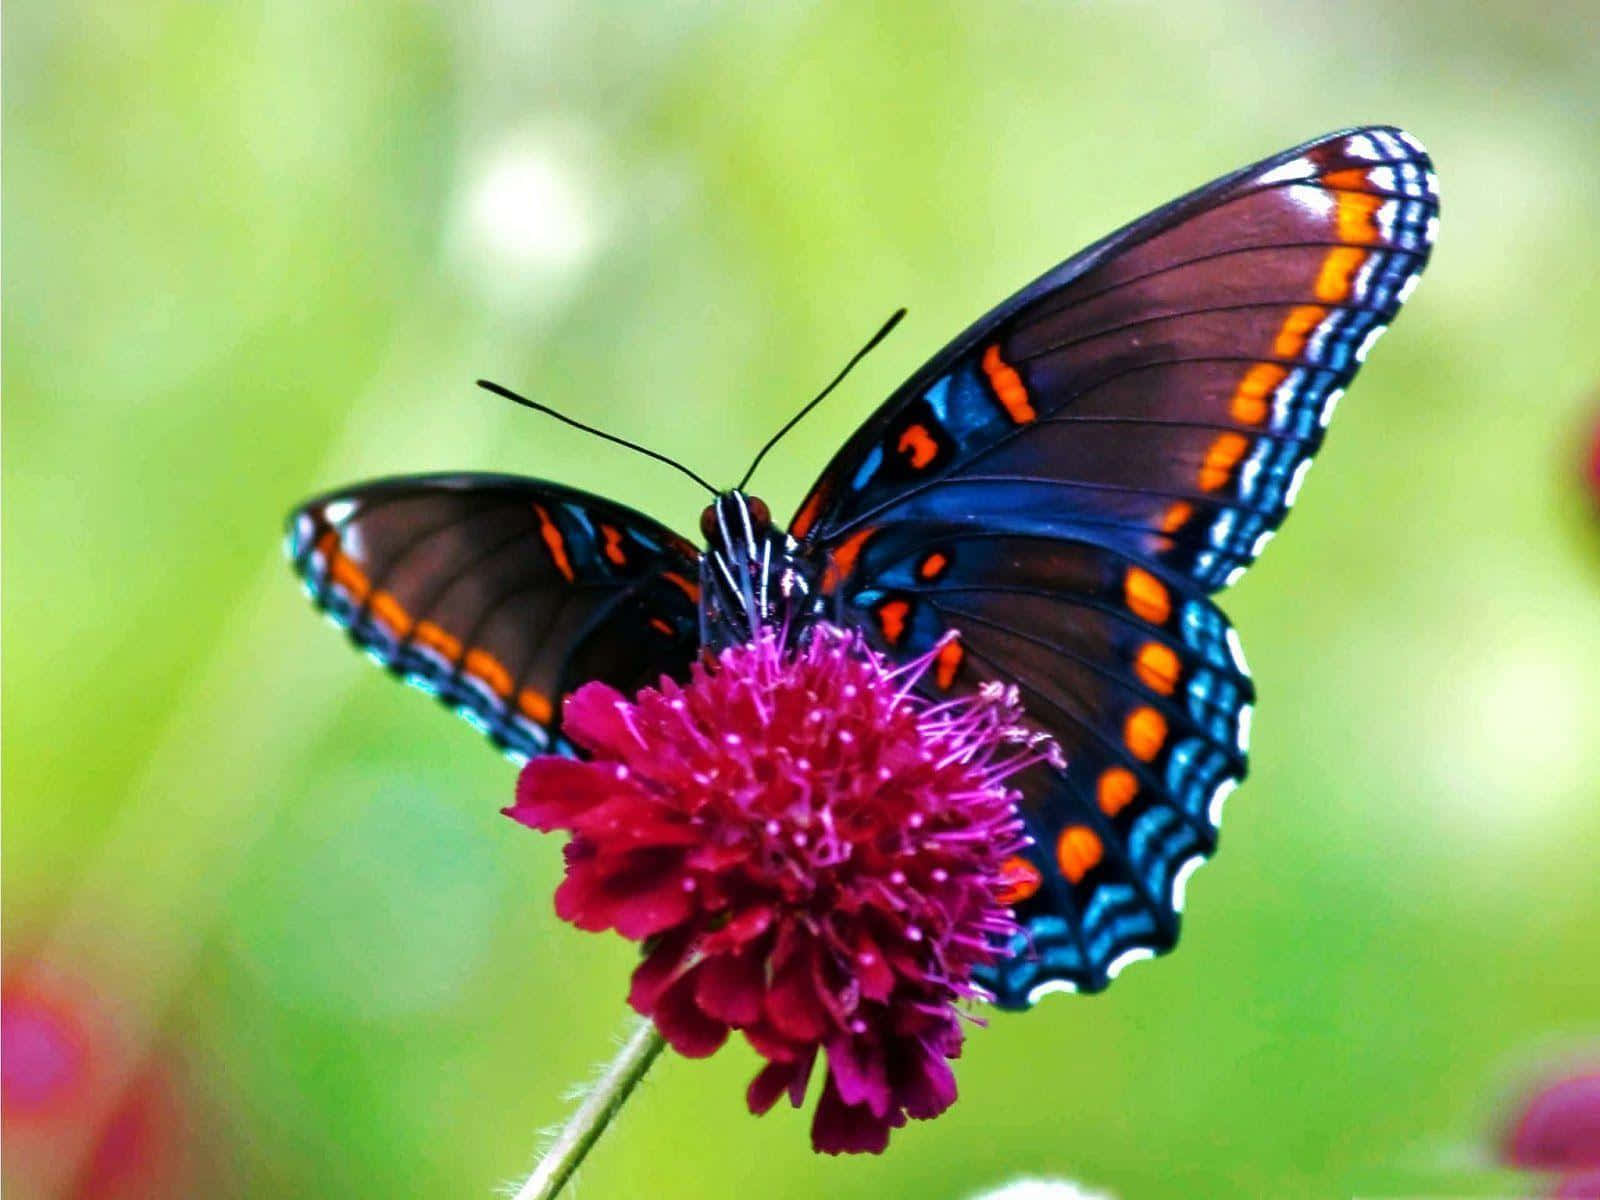 A beautiful butterfly resting on a pink flower Wallpaper